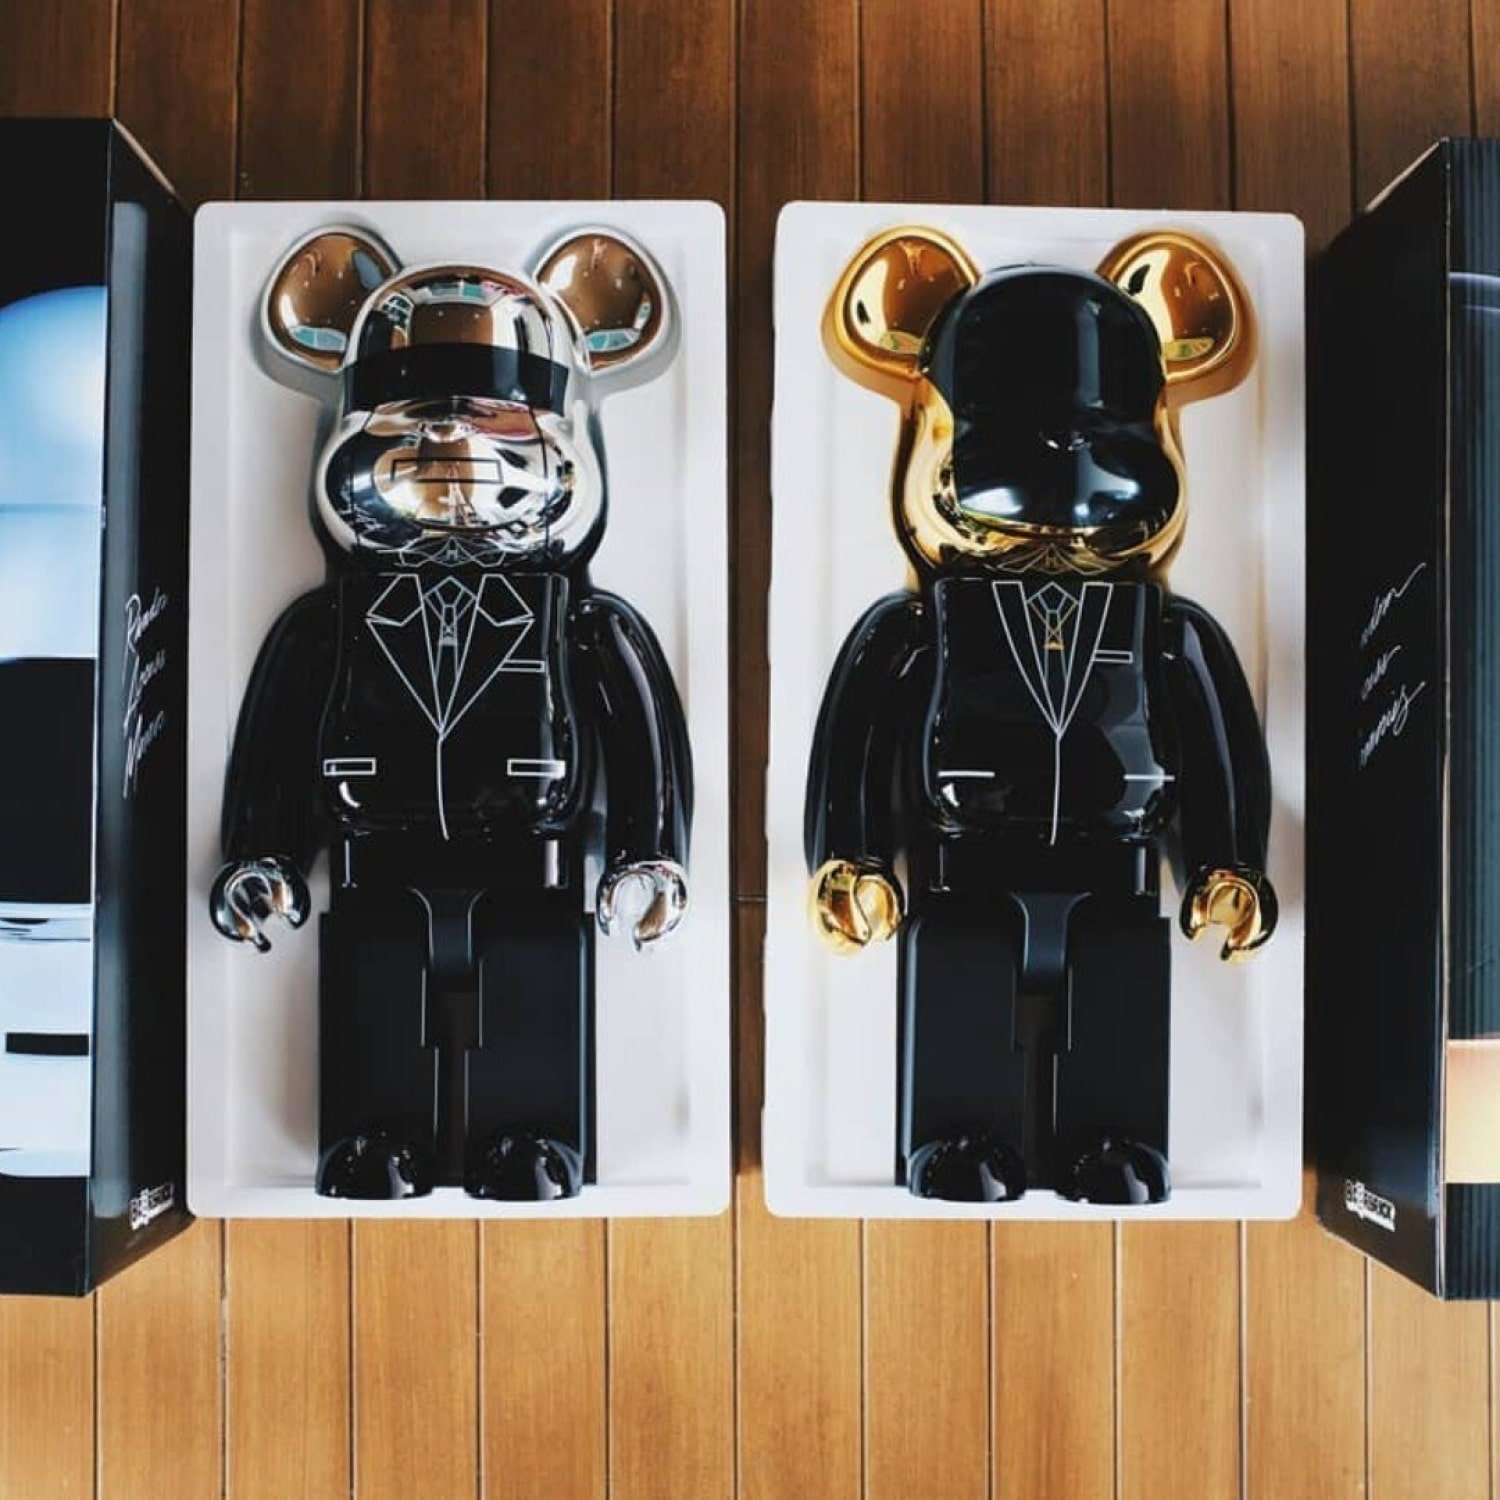 Daft Punk” from Be@rbrick - Dope! Gallery